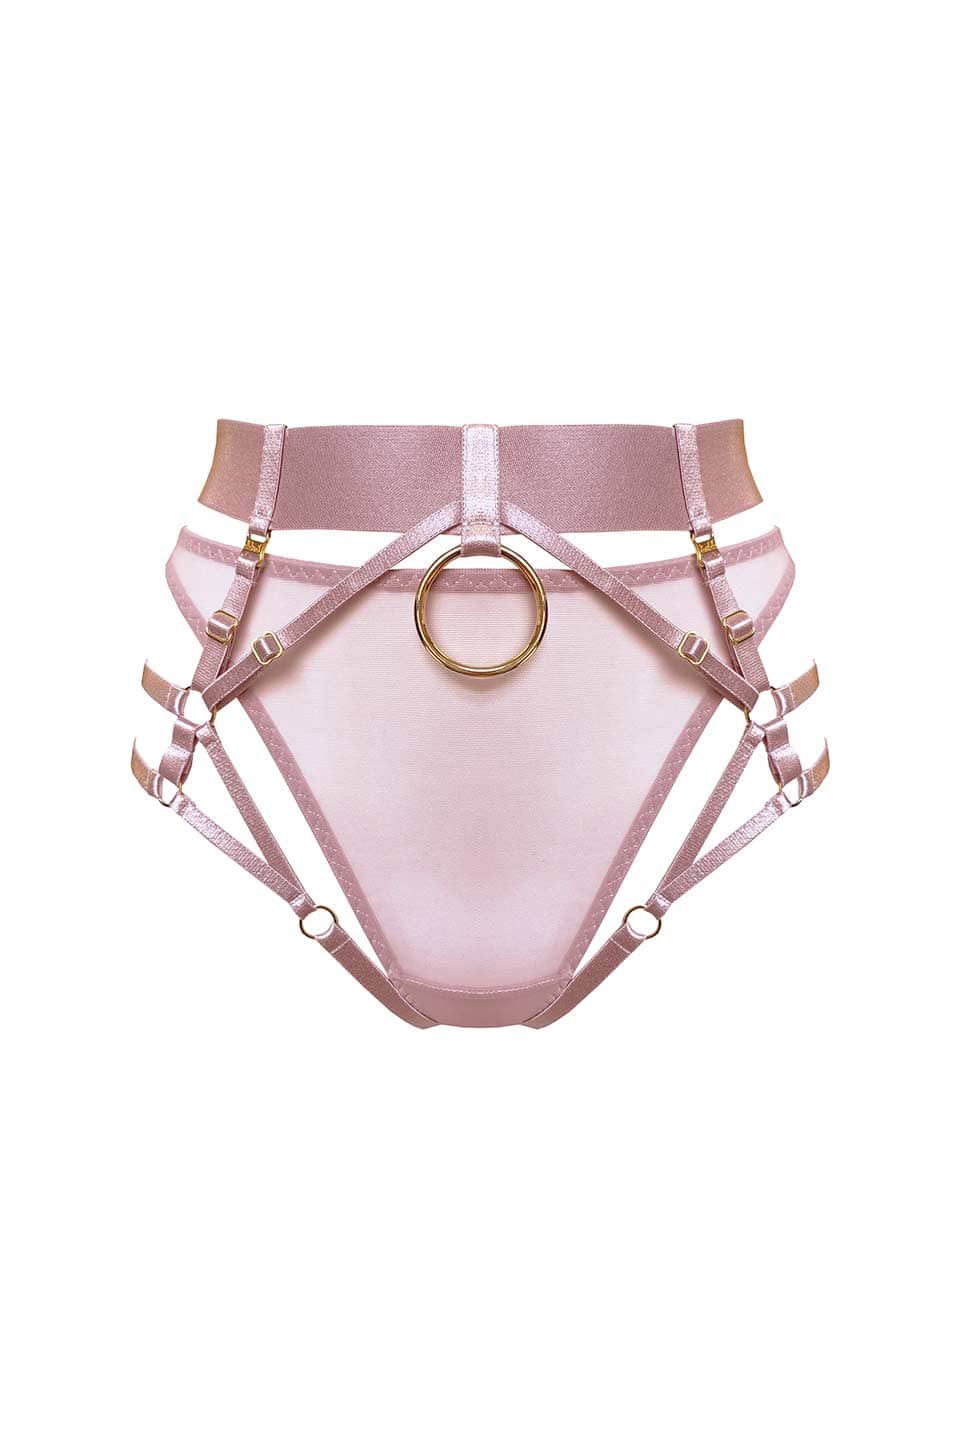 Atelier bordelle kora multi style harness brief without thong rose front